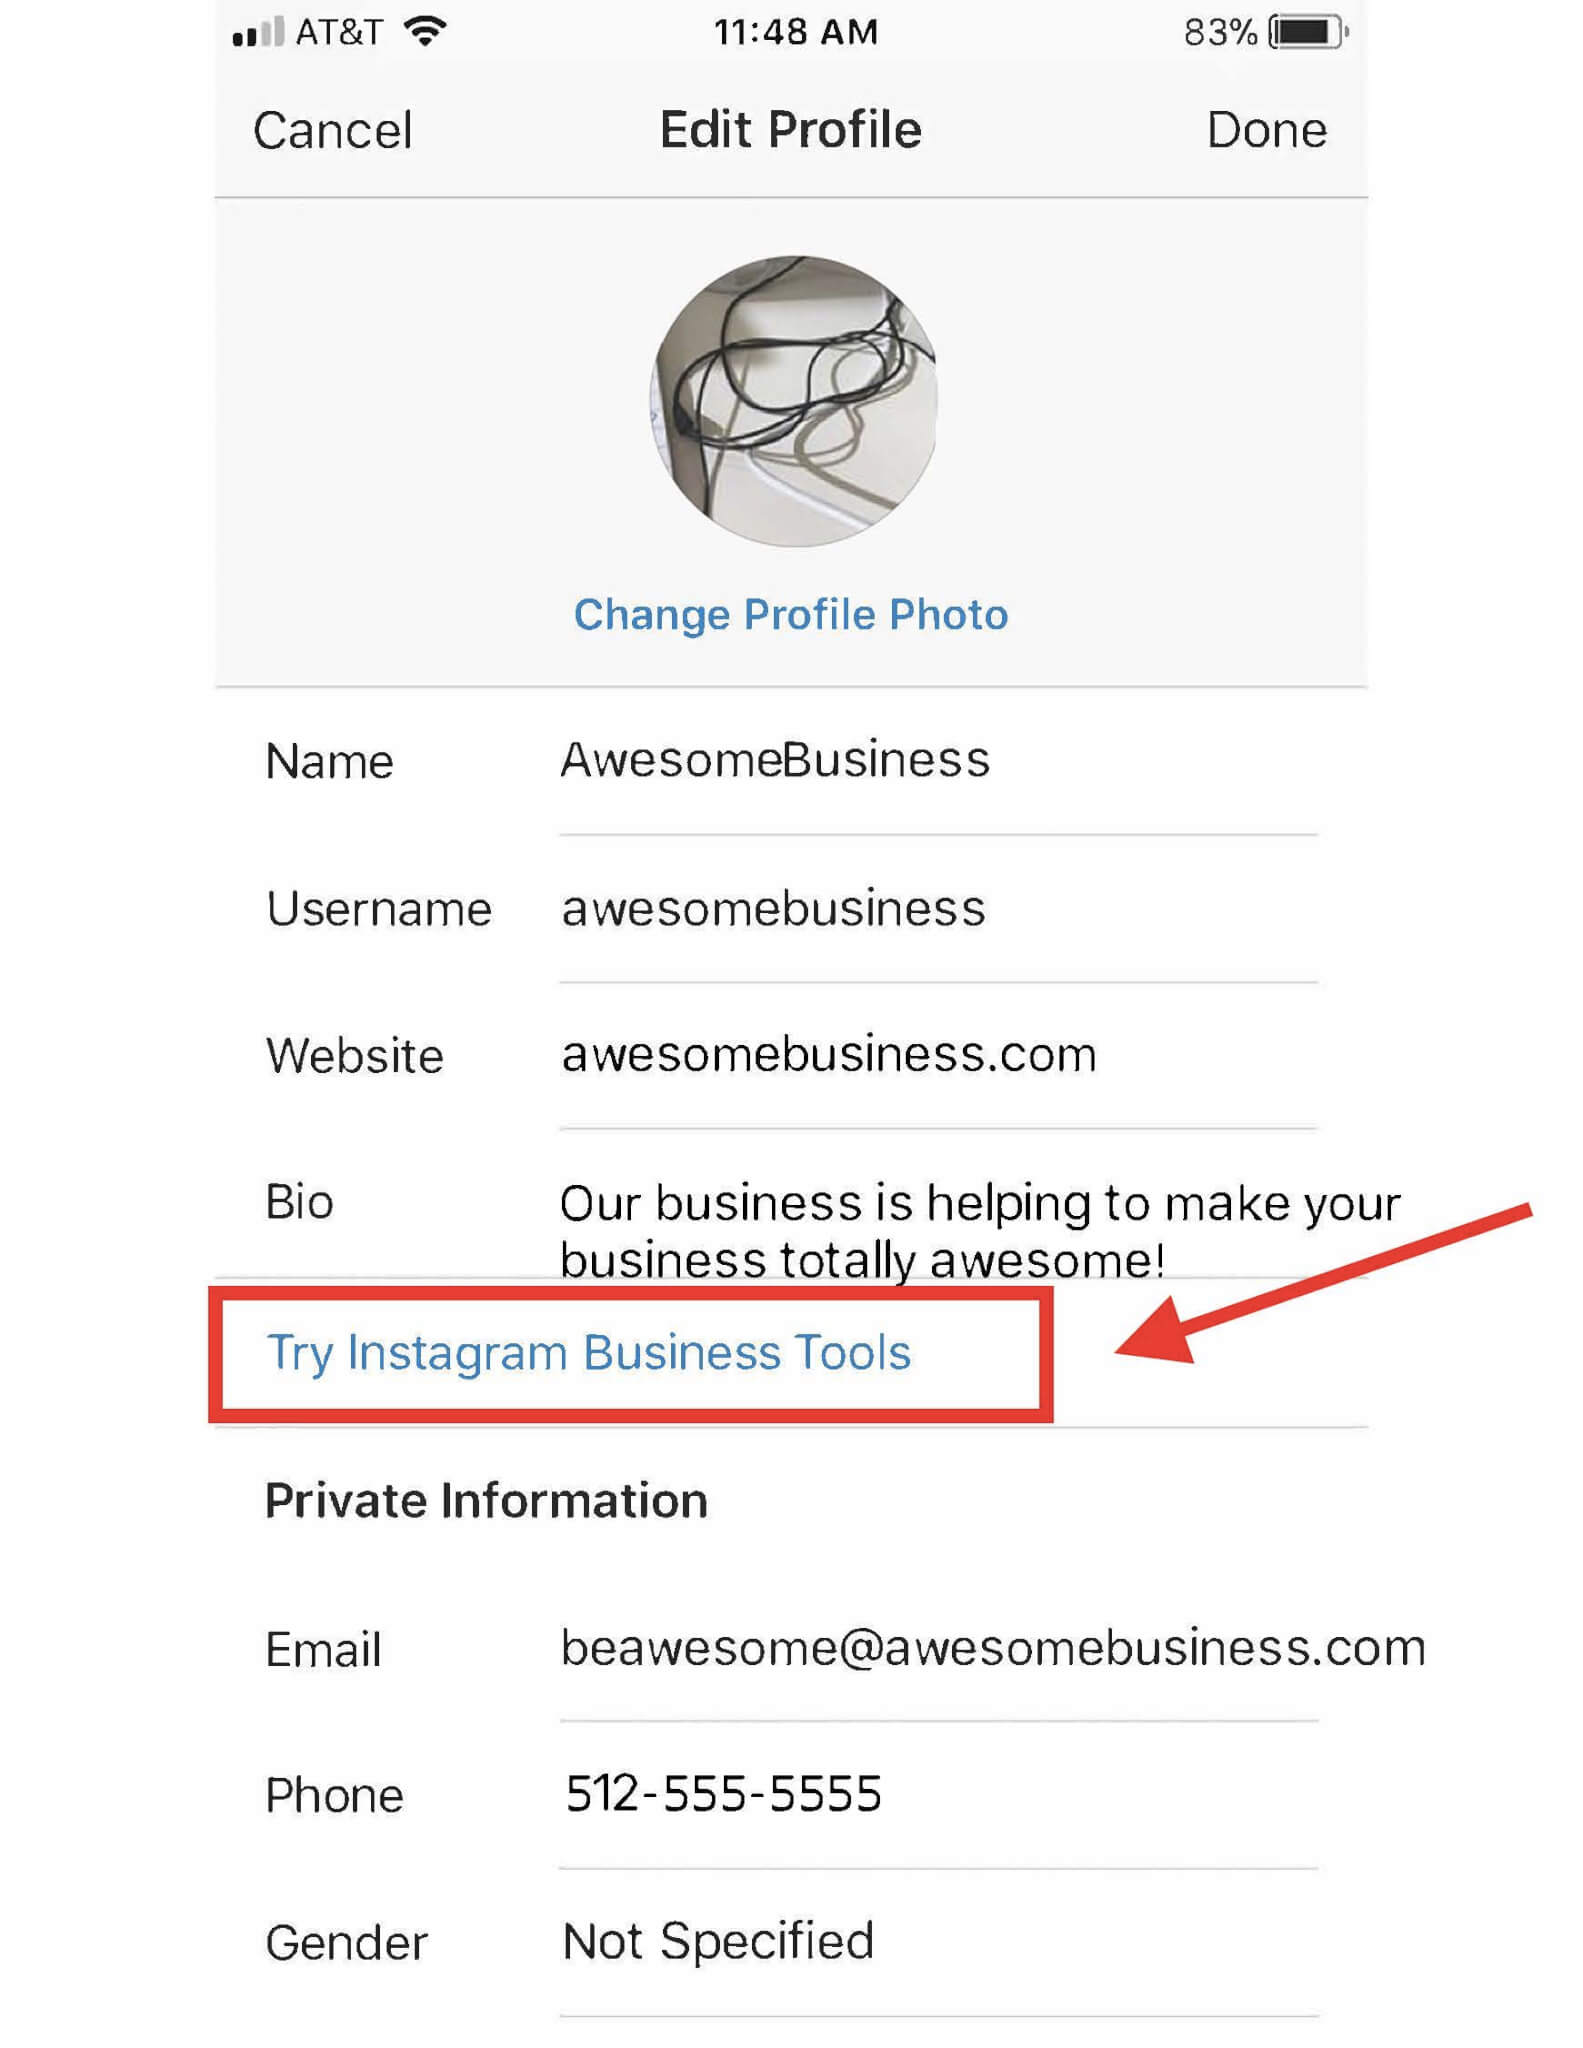 How to Set Up an Instagram Business Account | OutboundEngine